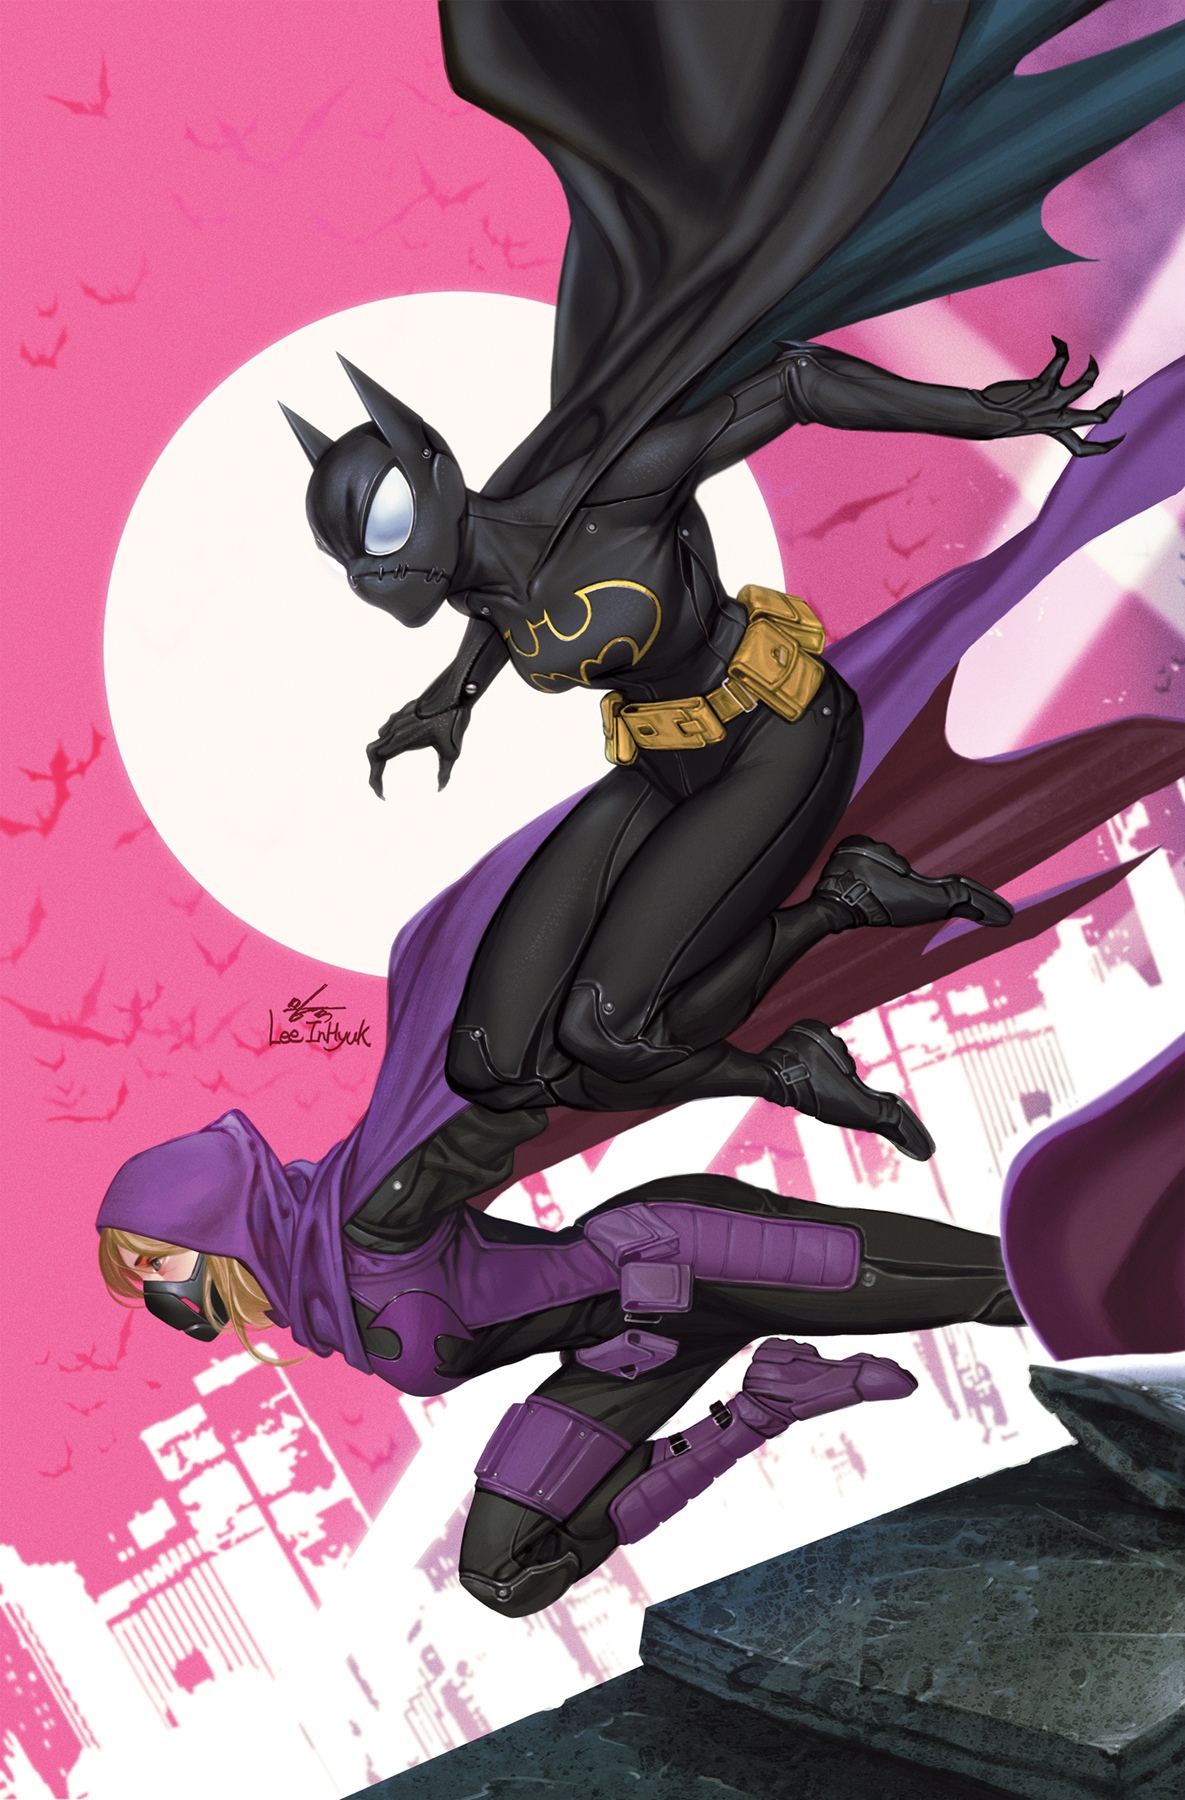 Batwing & Vixen, A New Series For Dawn Of DC? (Spoilers)